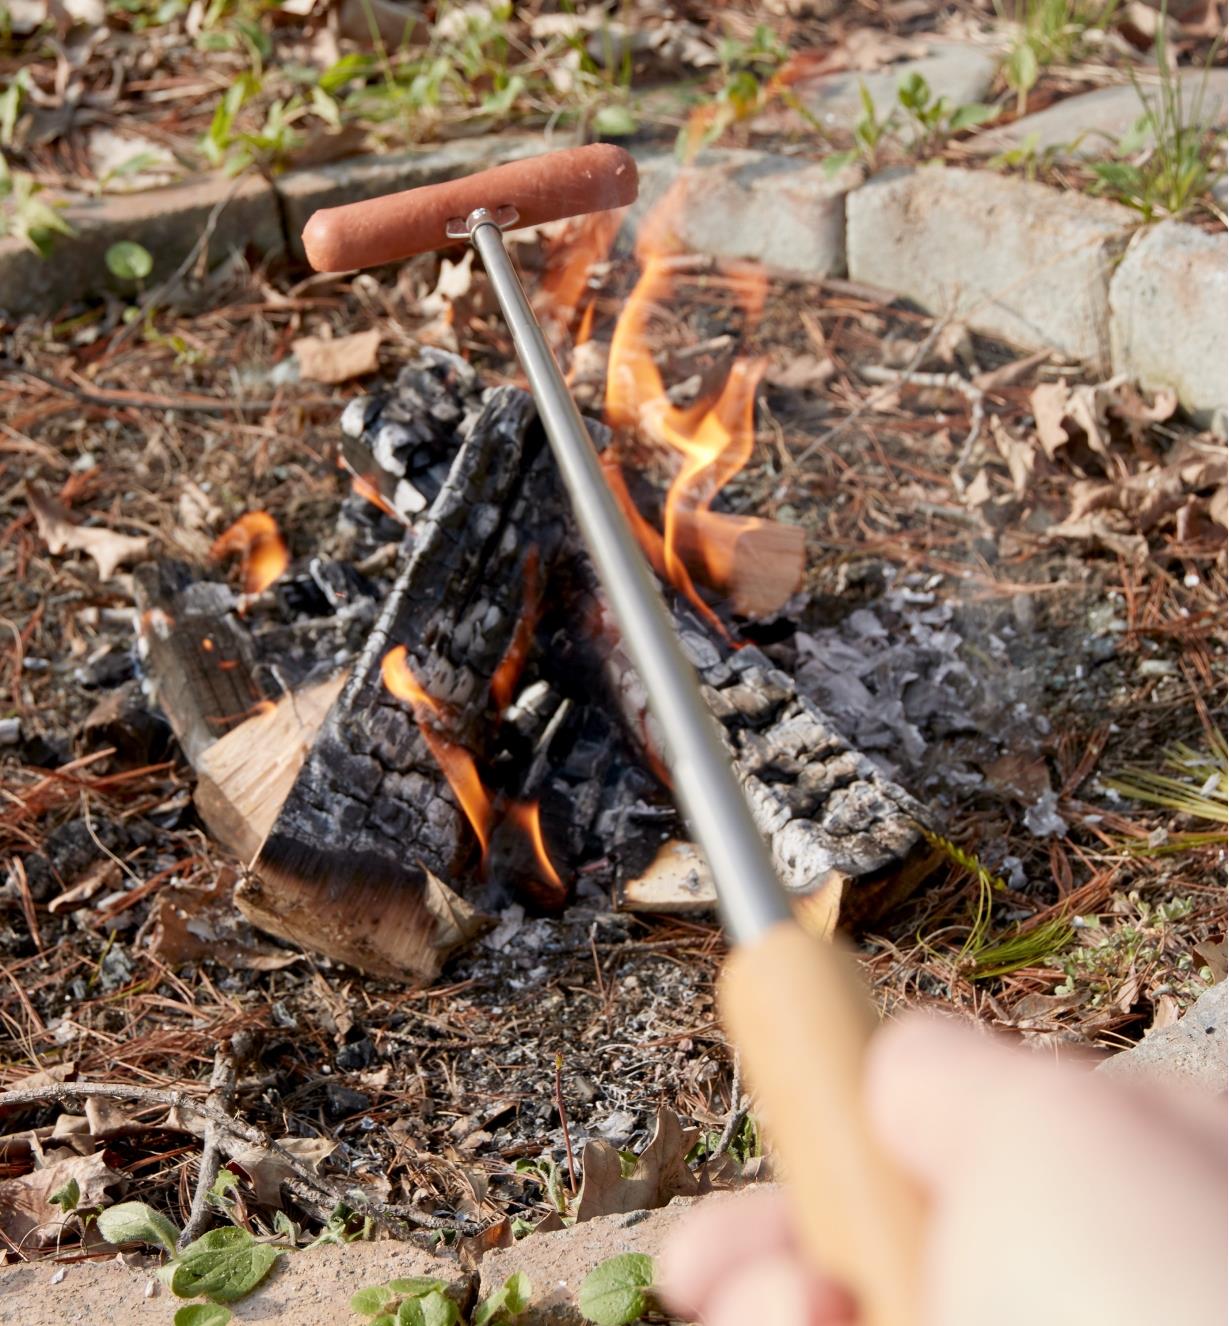 Cooking a hot dog over a campfire using the telescoping campfire fork